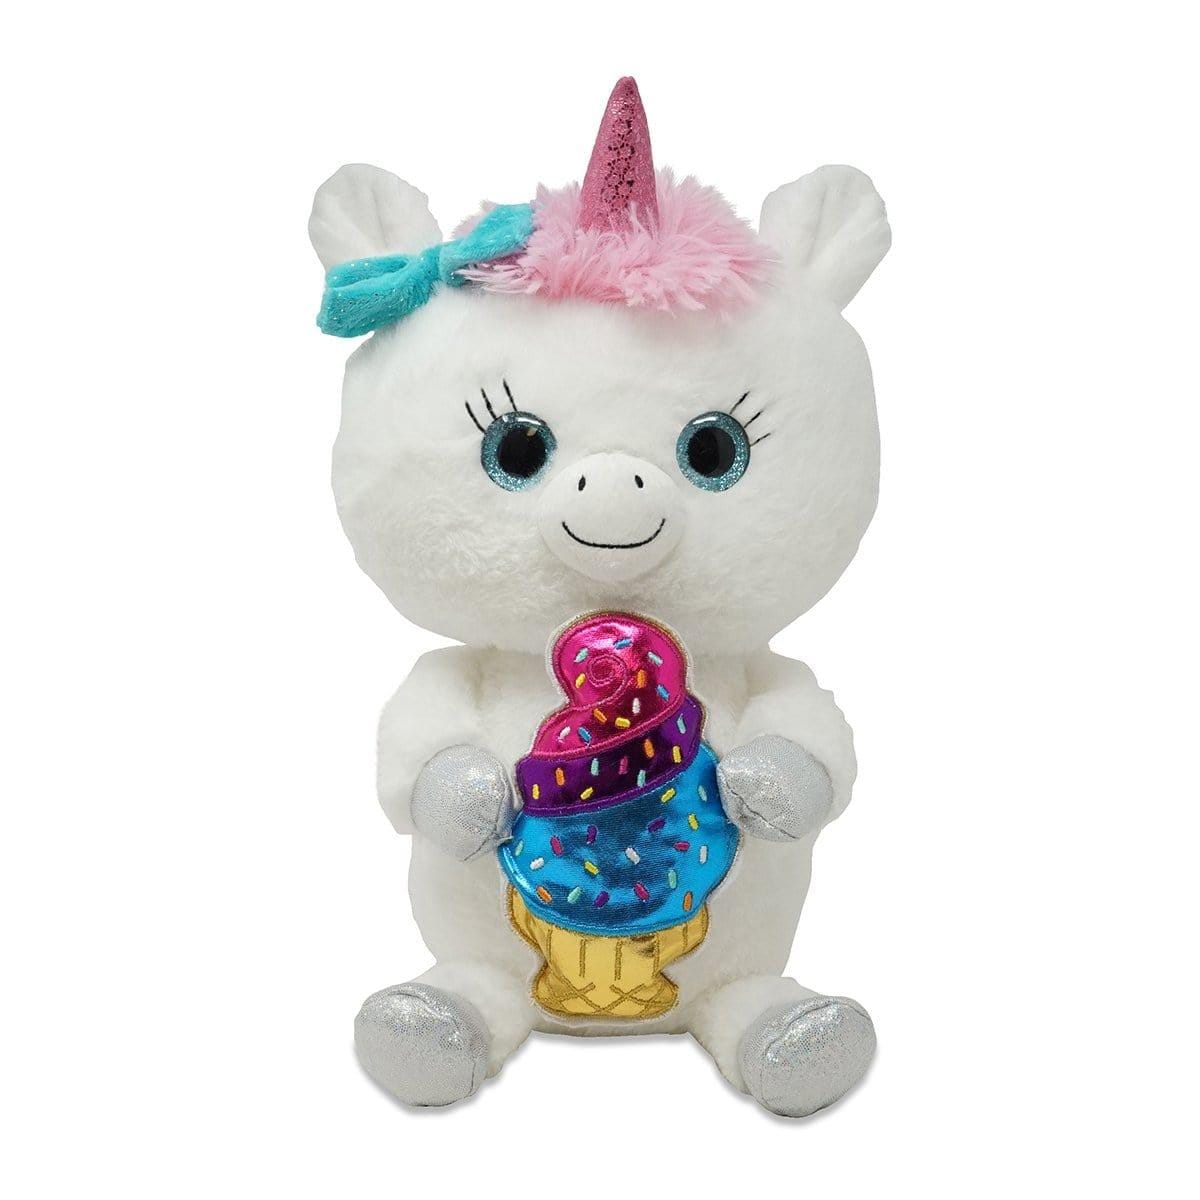 Buy Plushes Unicorn Plush With Ice Cream sold at Party Expert